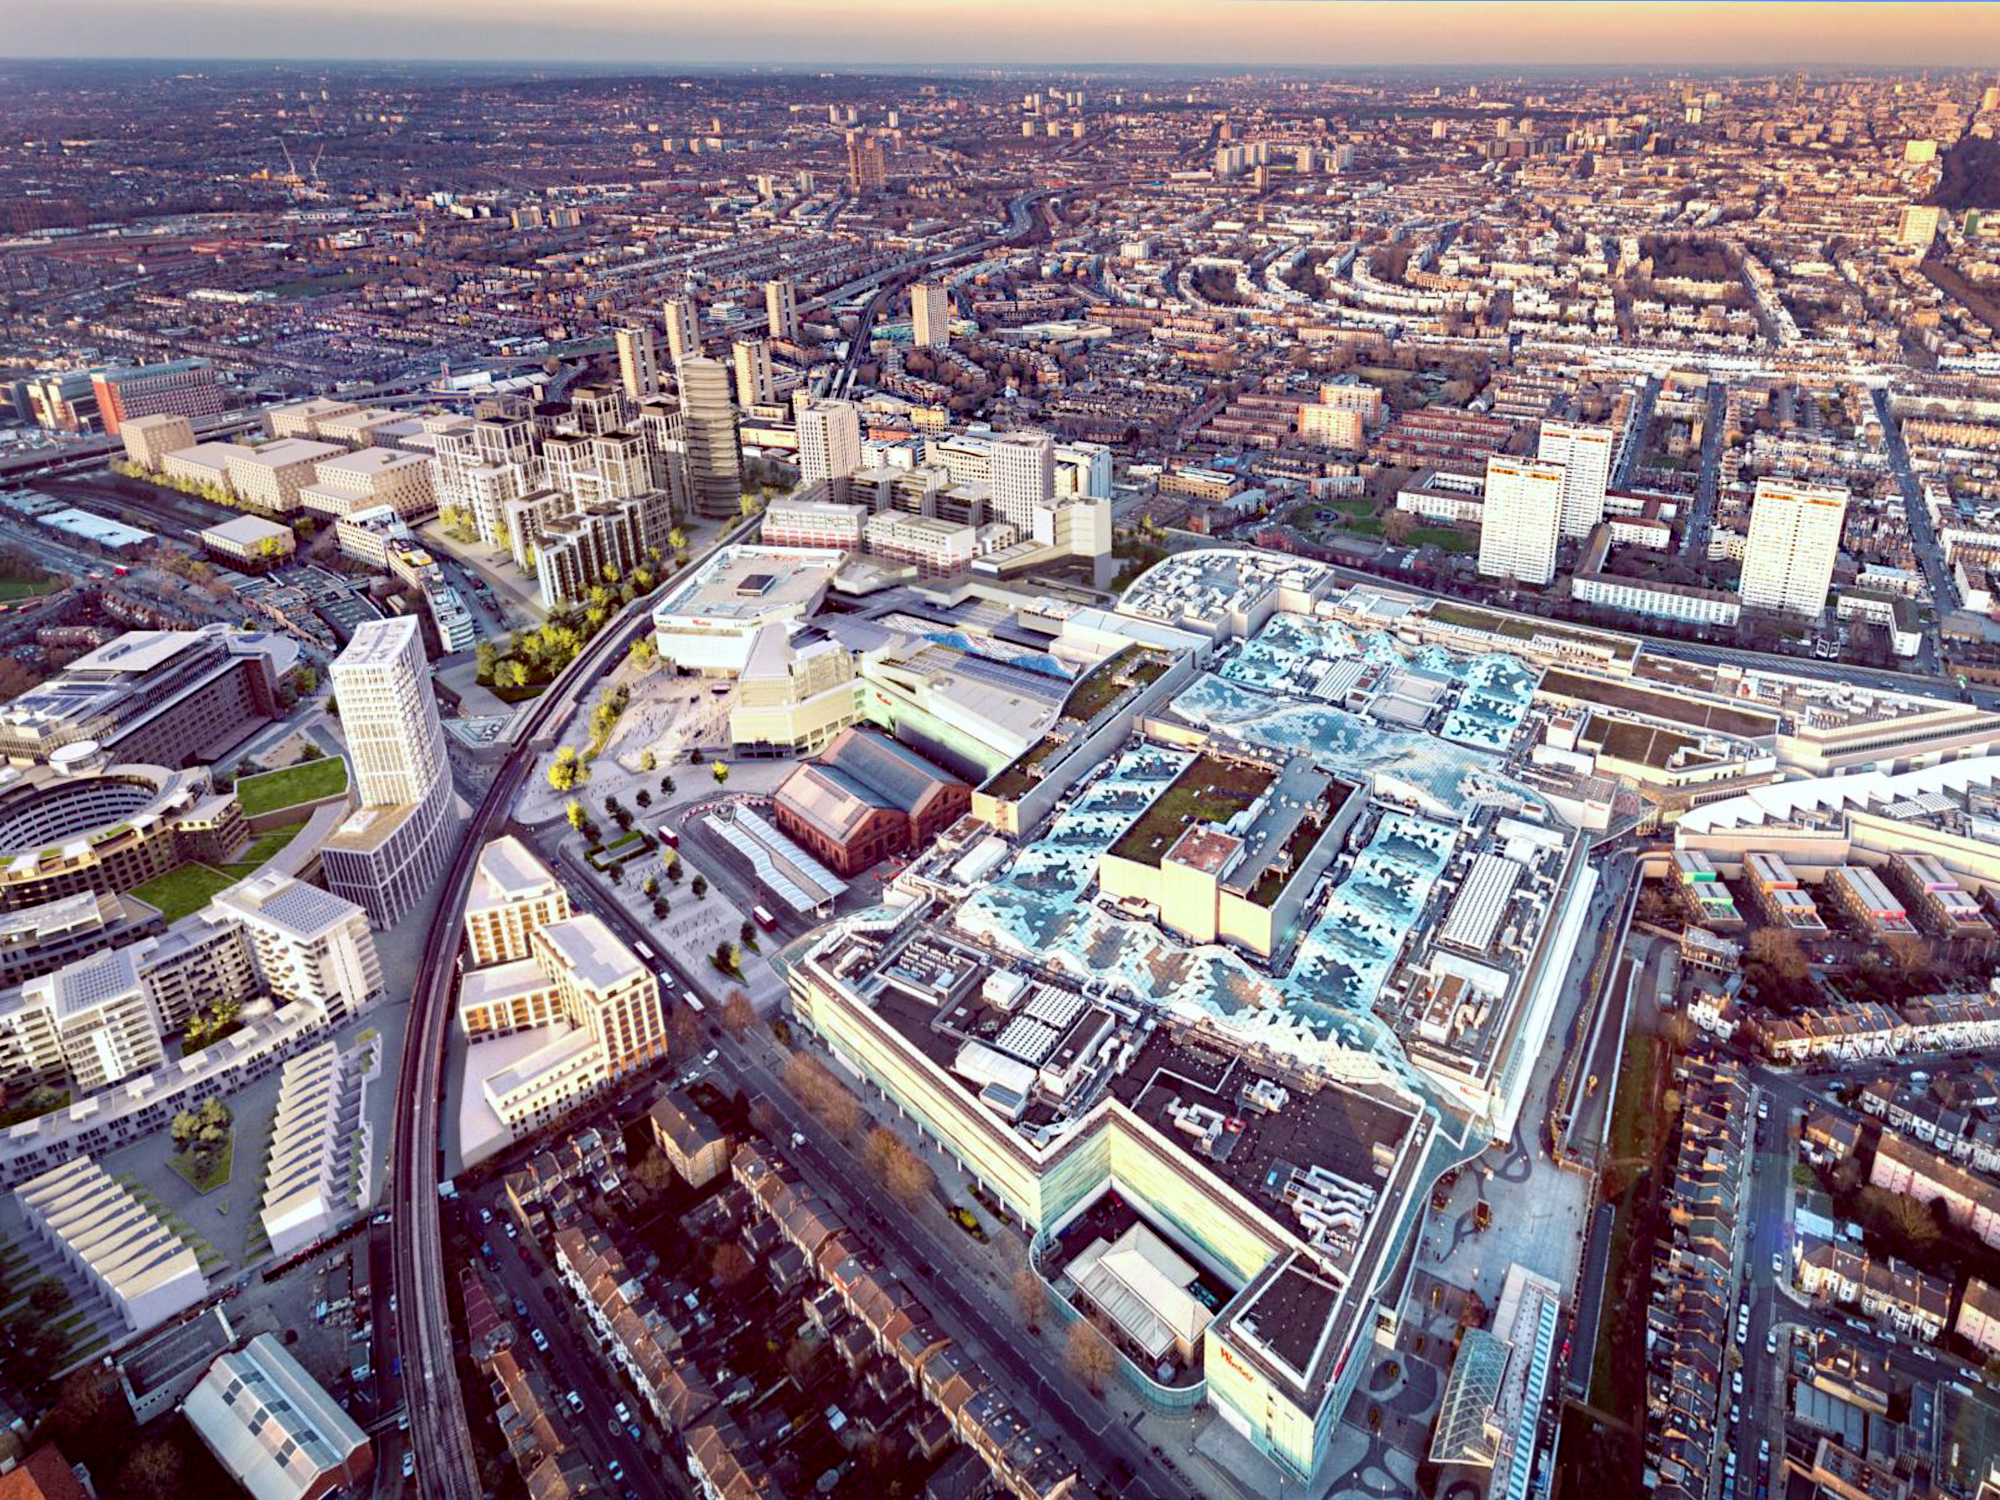 The Village at Westfield London